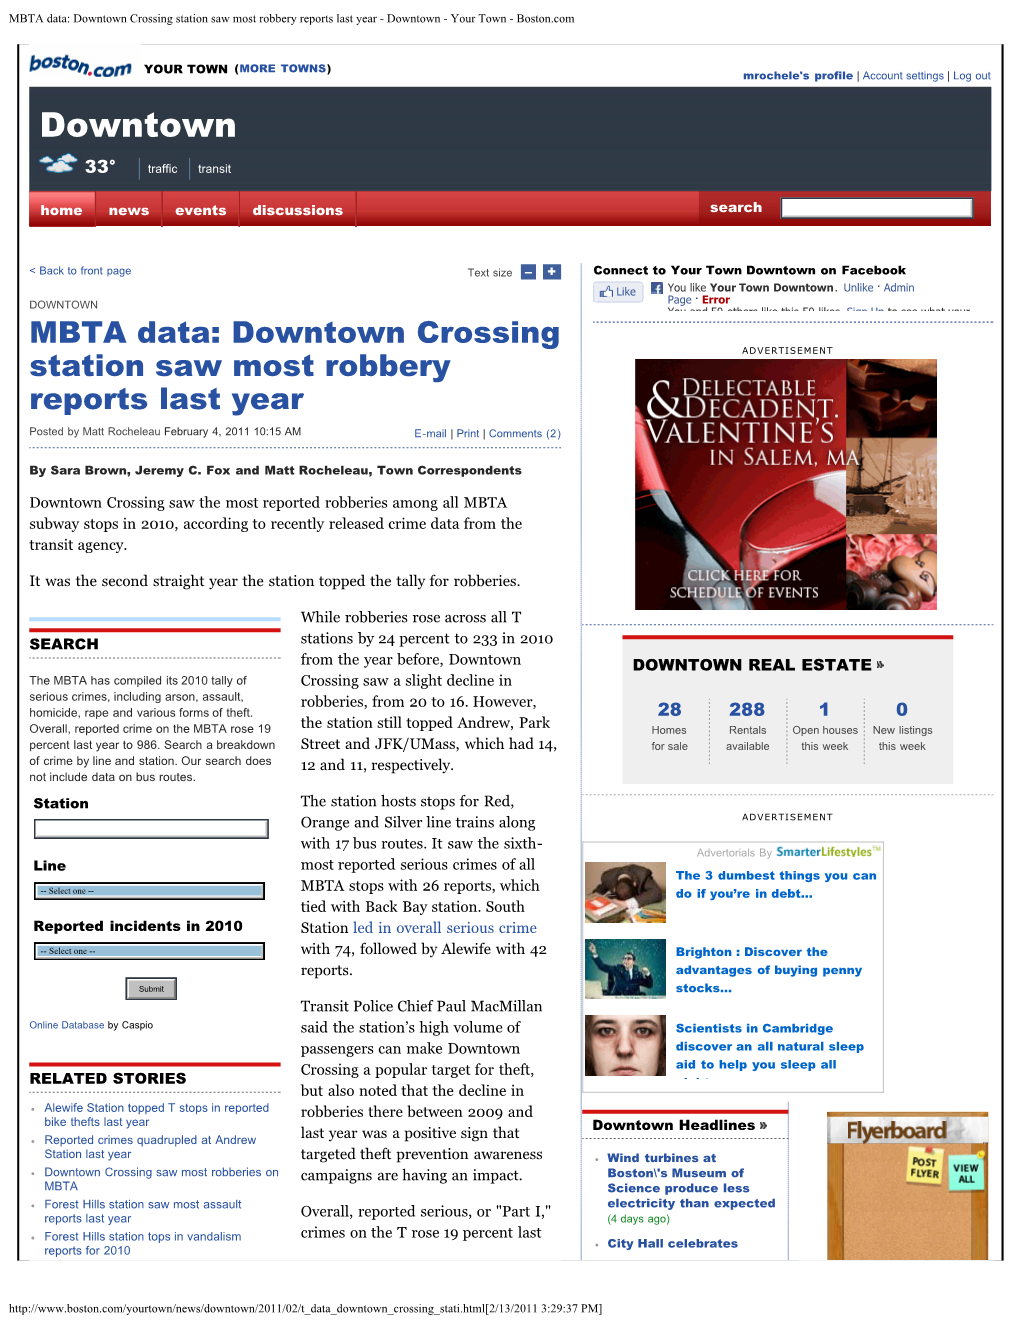 Downtown Crossing Station Saw Most Robbery Reports Last Year - Downtown - Your Town - Boston.Com